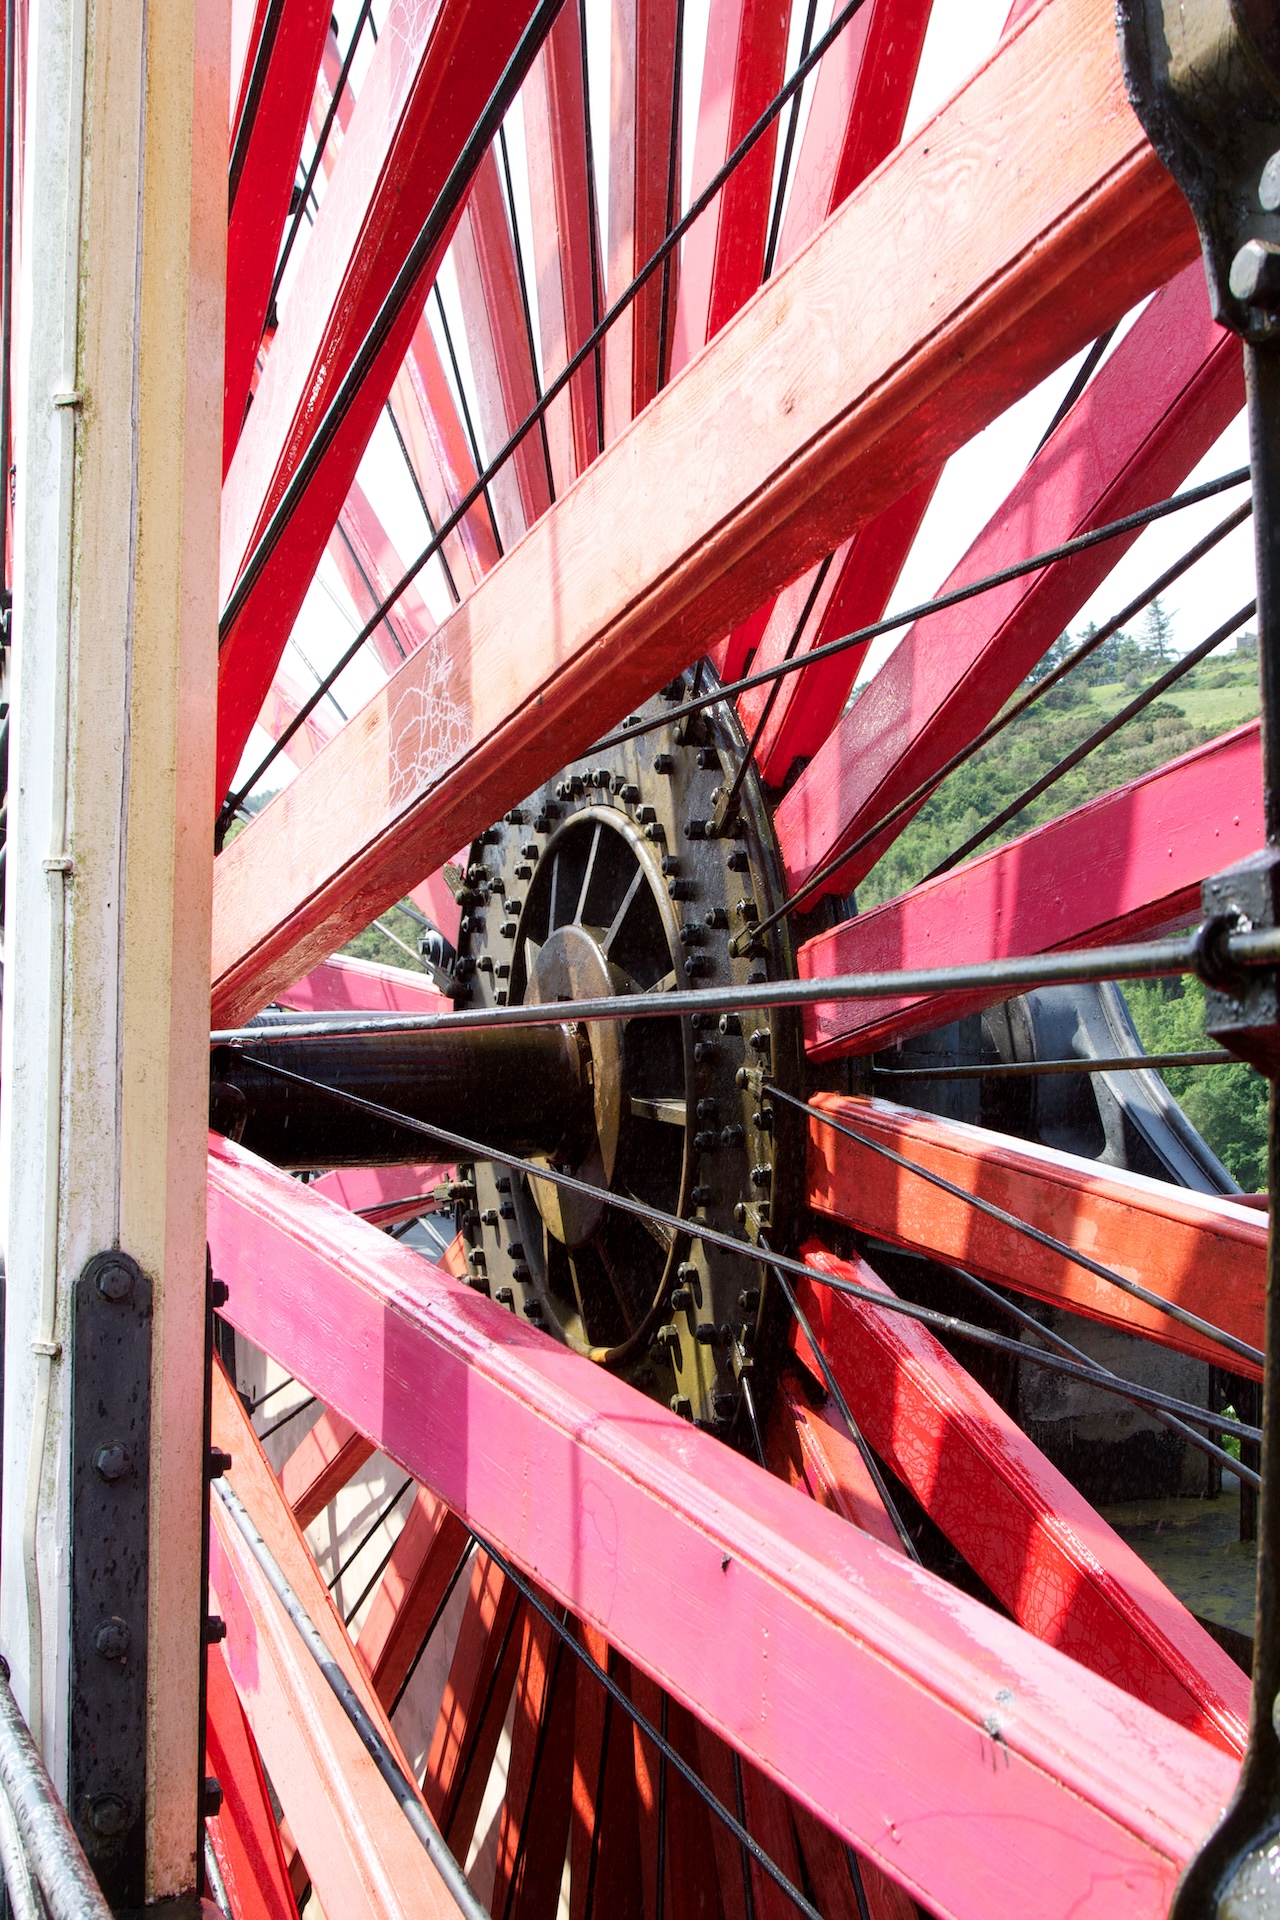 The Great Laxey Wheel Isle of Man